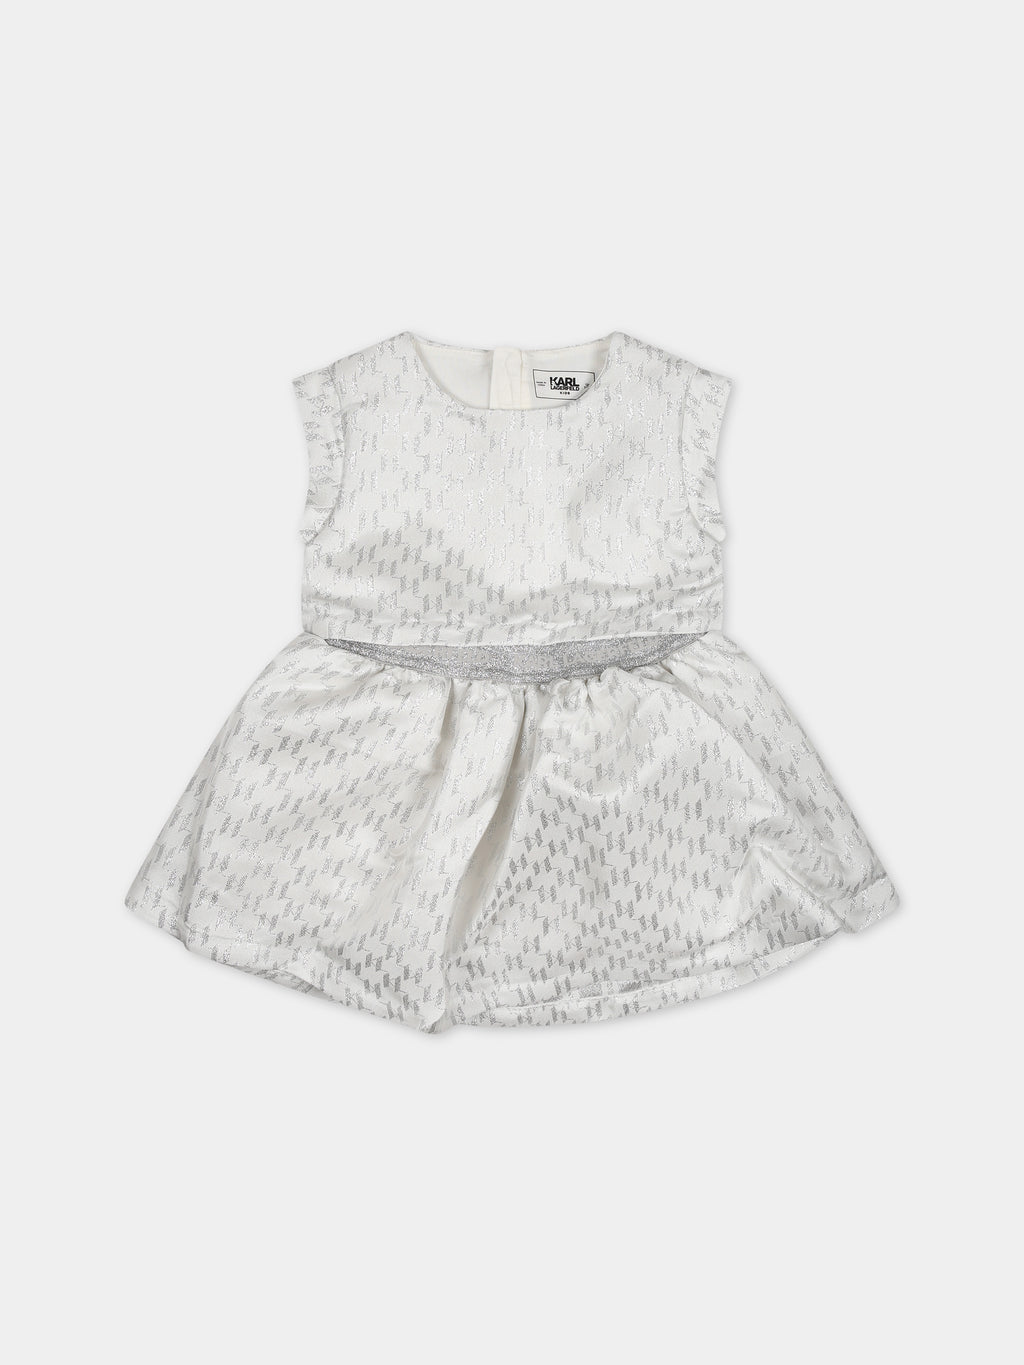 Silver dress for baby girl with all-over silver K/IKoniK graphic print